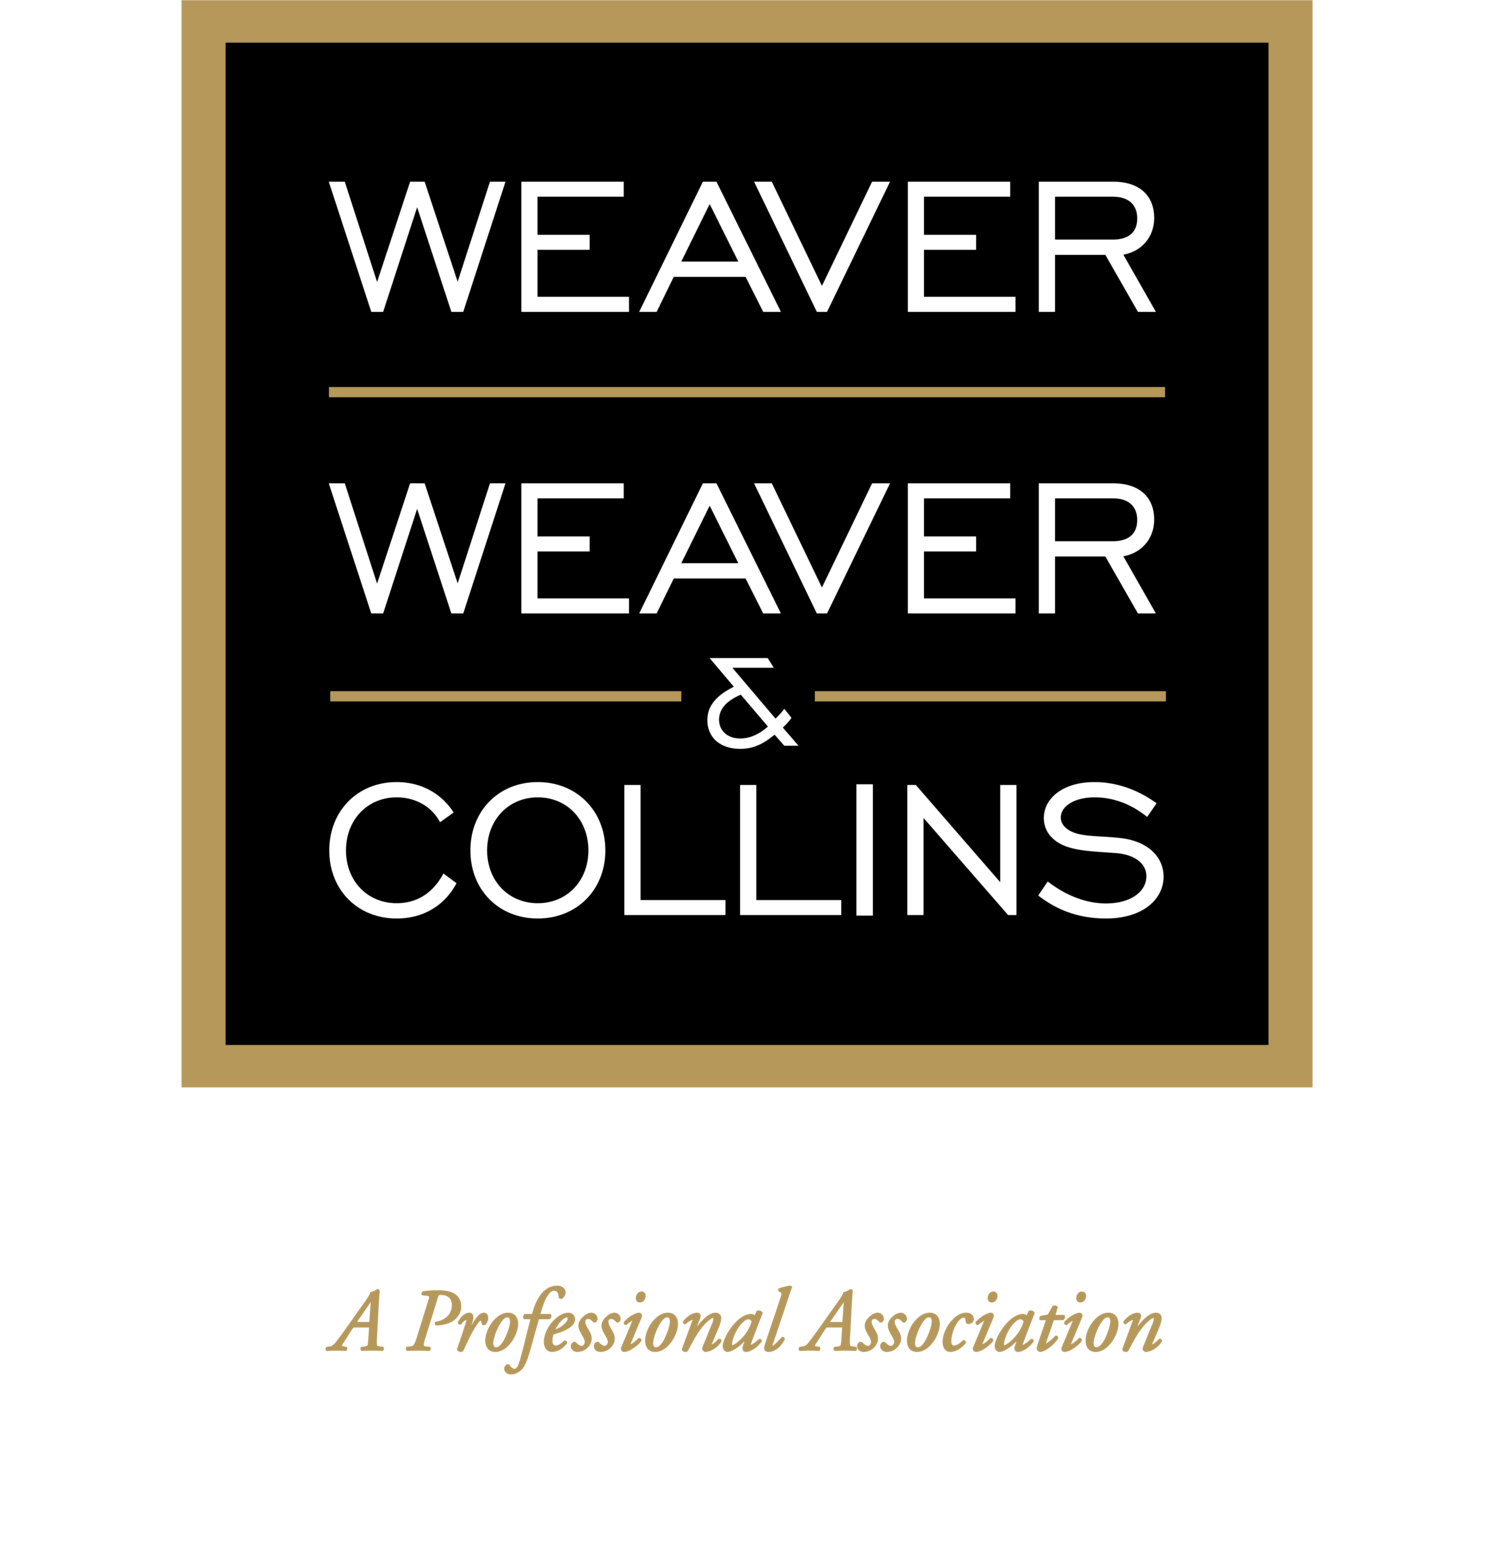 Weaver, Weaver & Collins, P.A. – Attorneys At Law